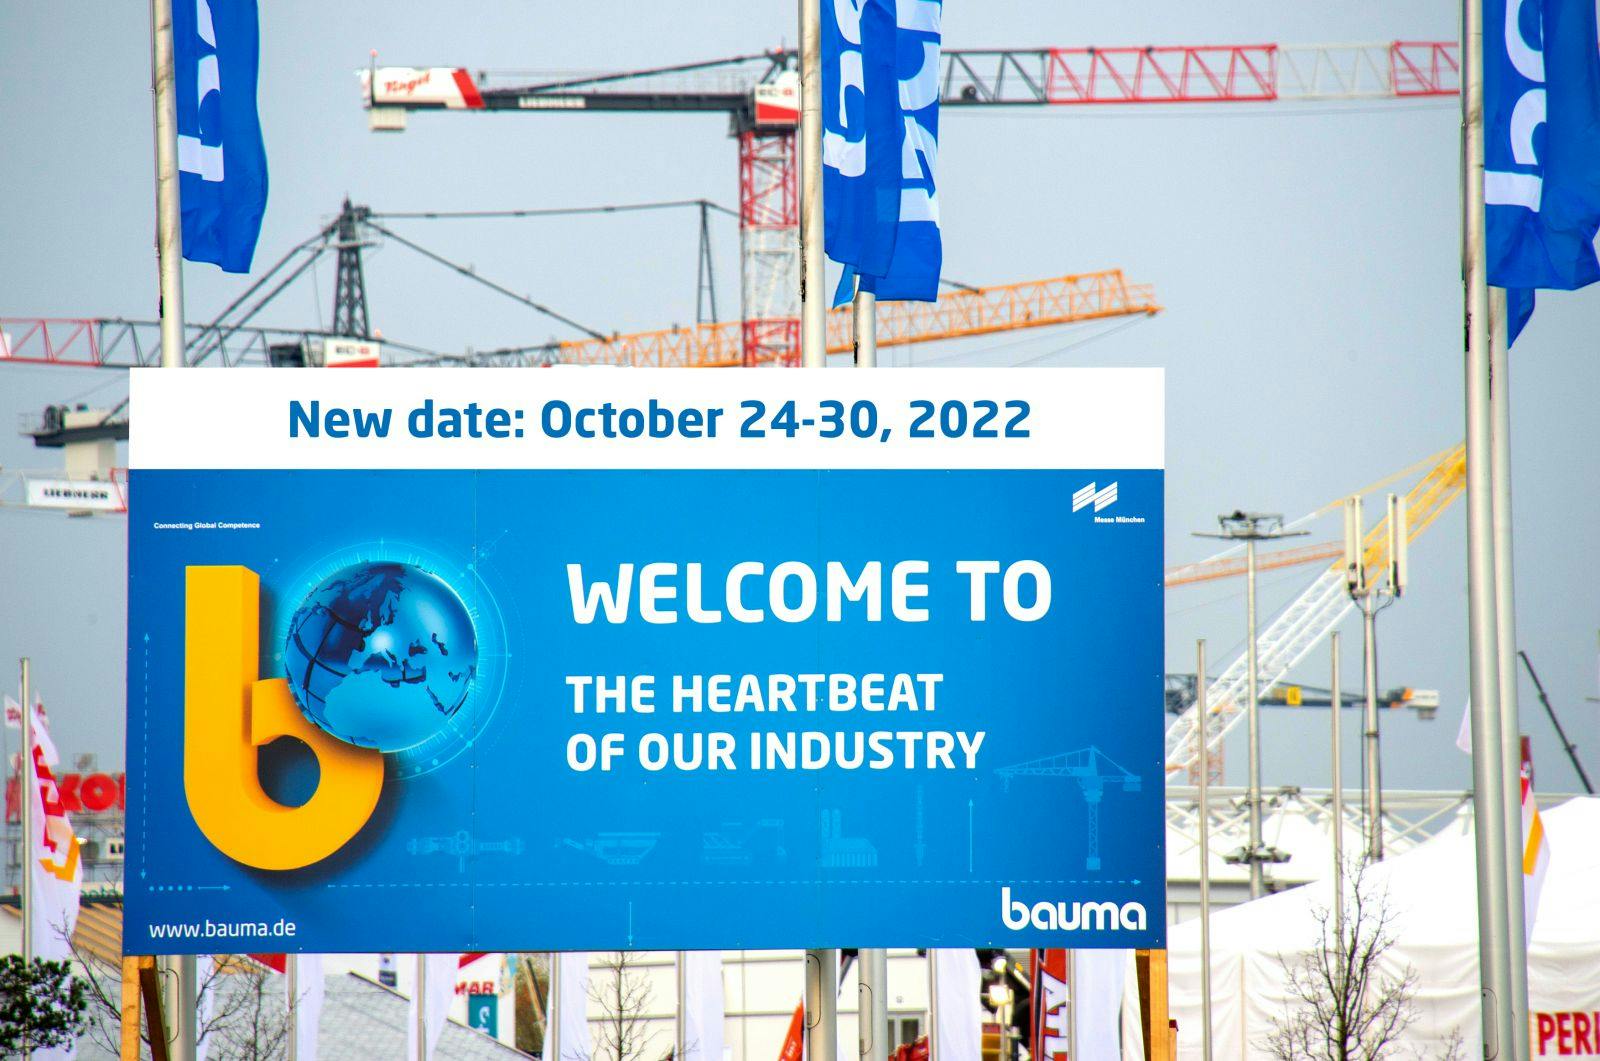 bauma 2022 Moved from April to October